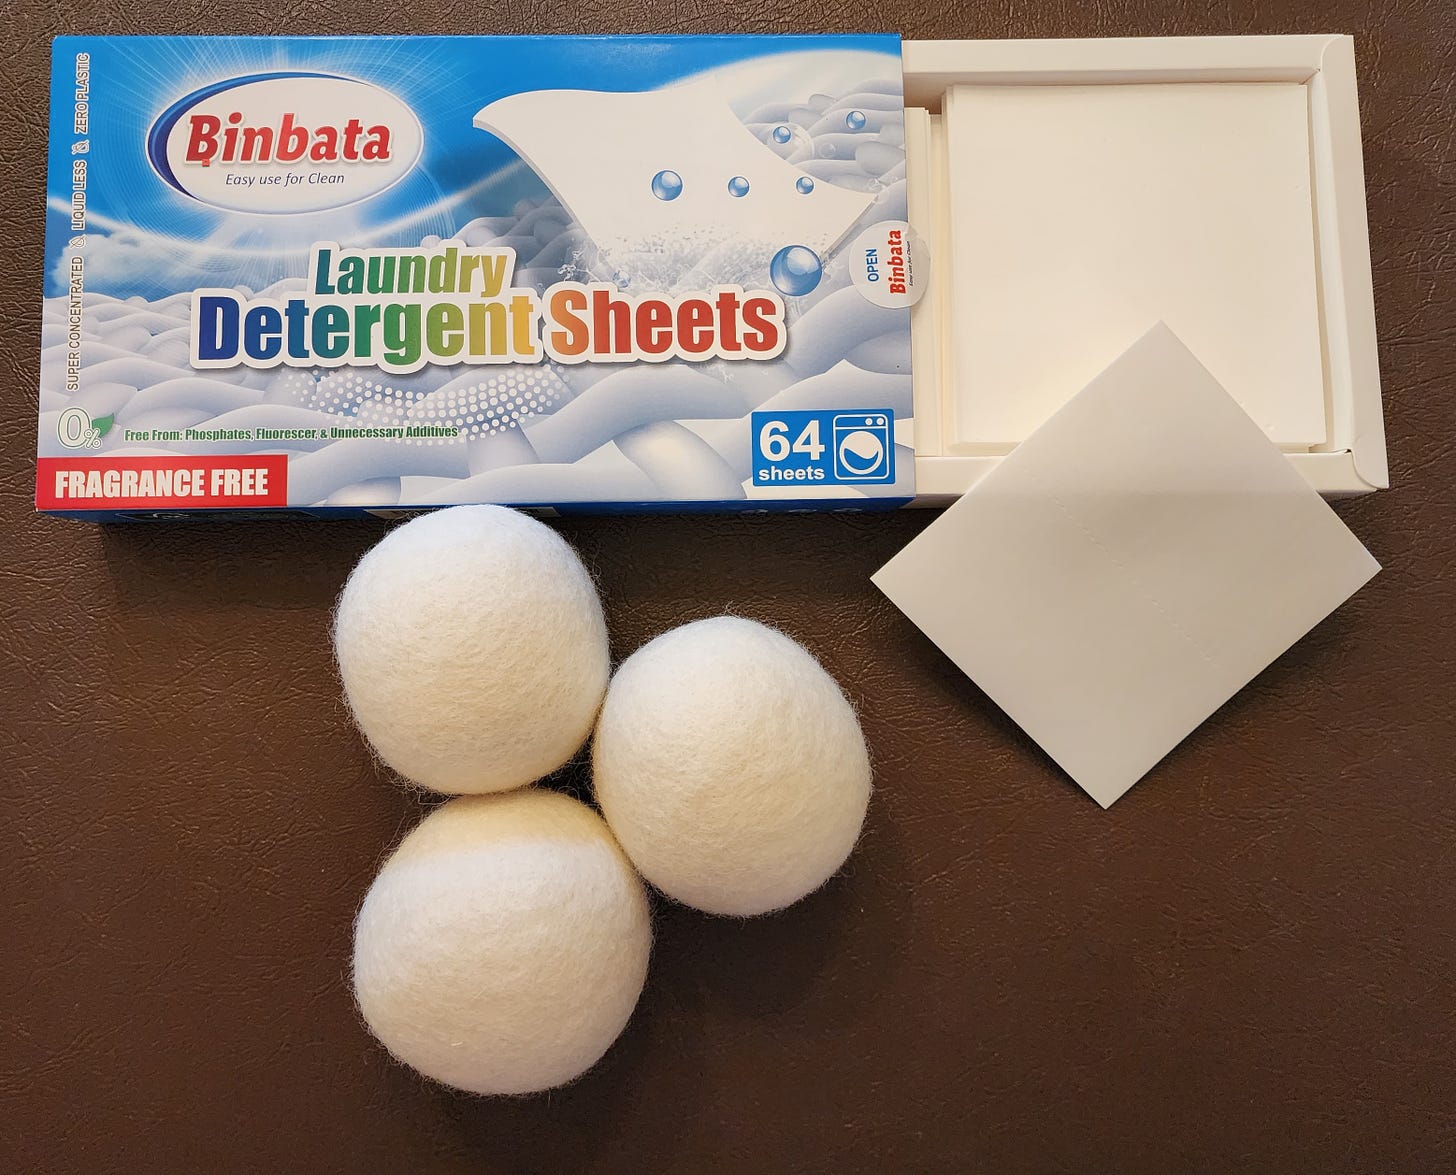 open box of laundry detergent sheets with three white wool dryer balls